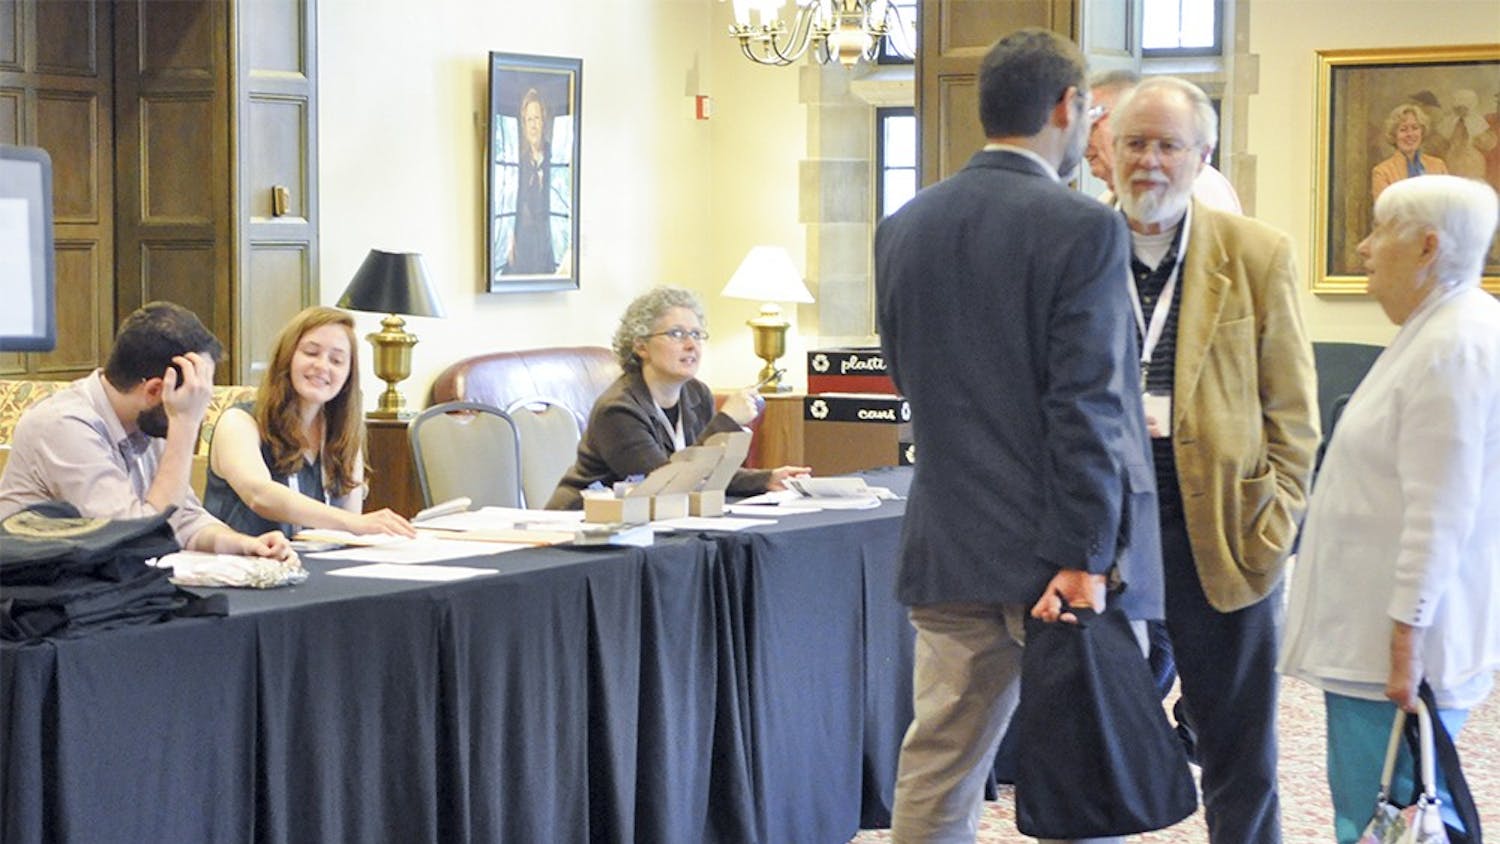 Members of the Association for Recorded Sound Collections welcome visitors to the organization's 50th Anniversary conference on Wednesday afternoon at the Indiana Memorial Union.